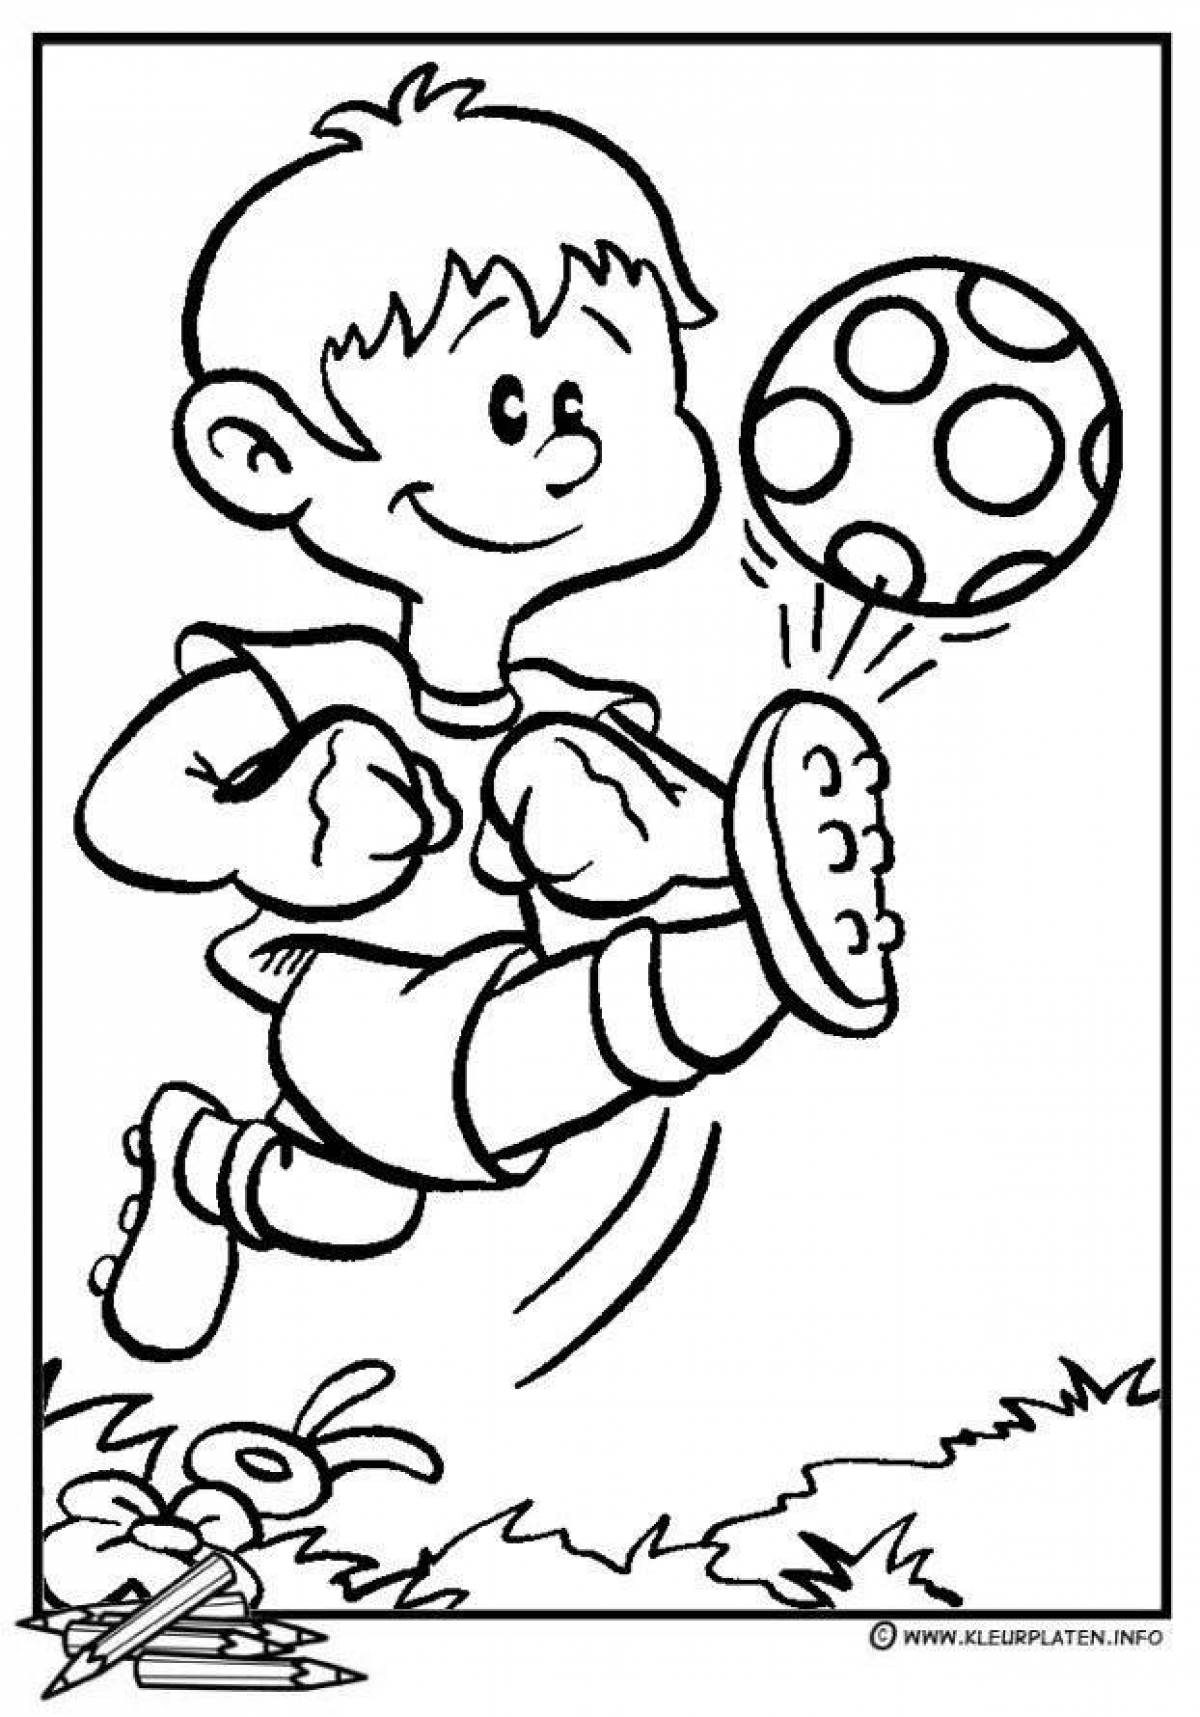 Nice sports coloring book for kids